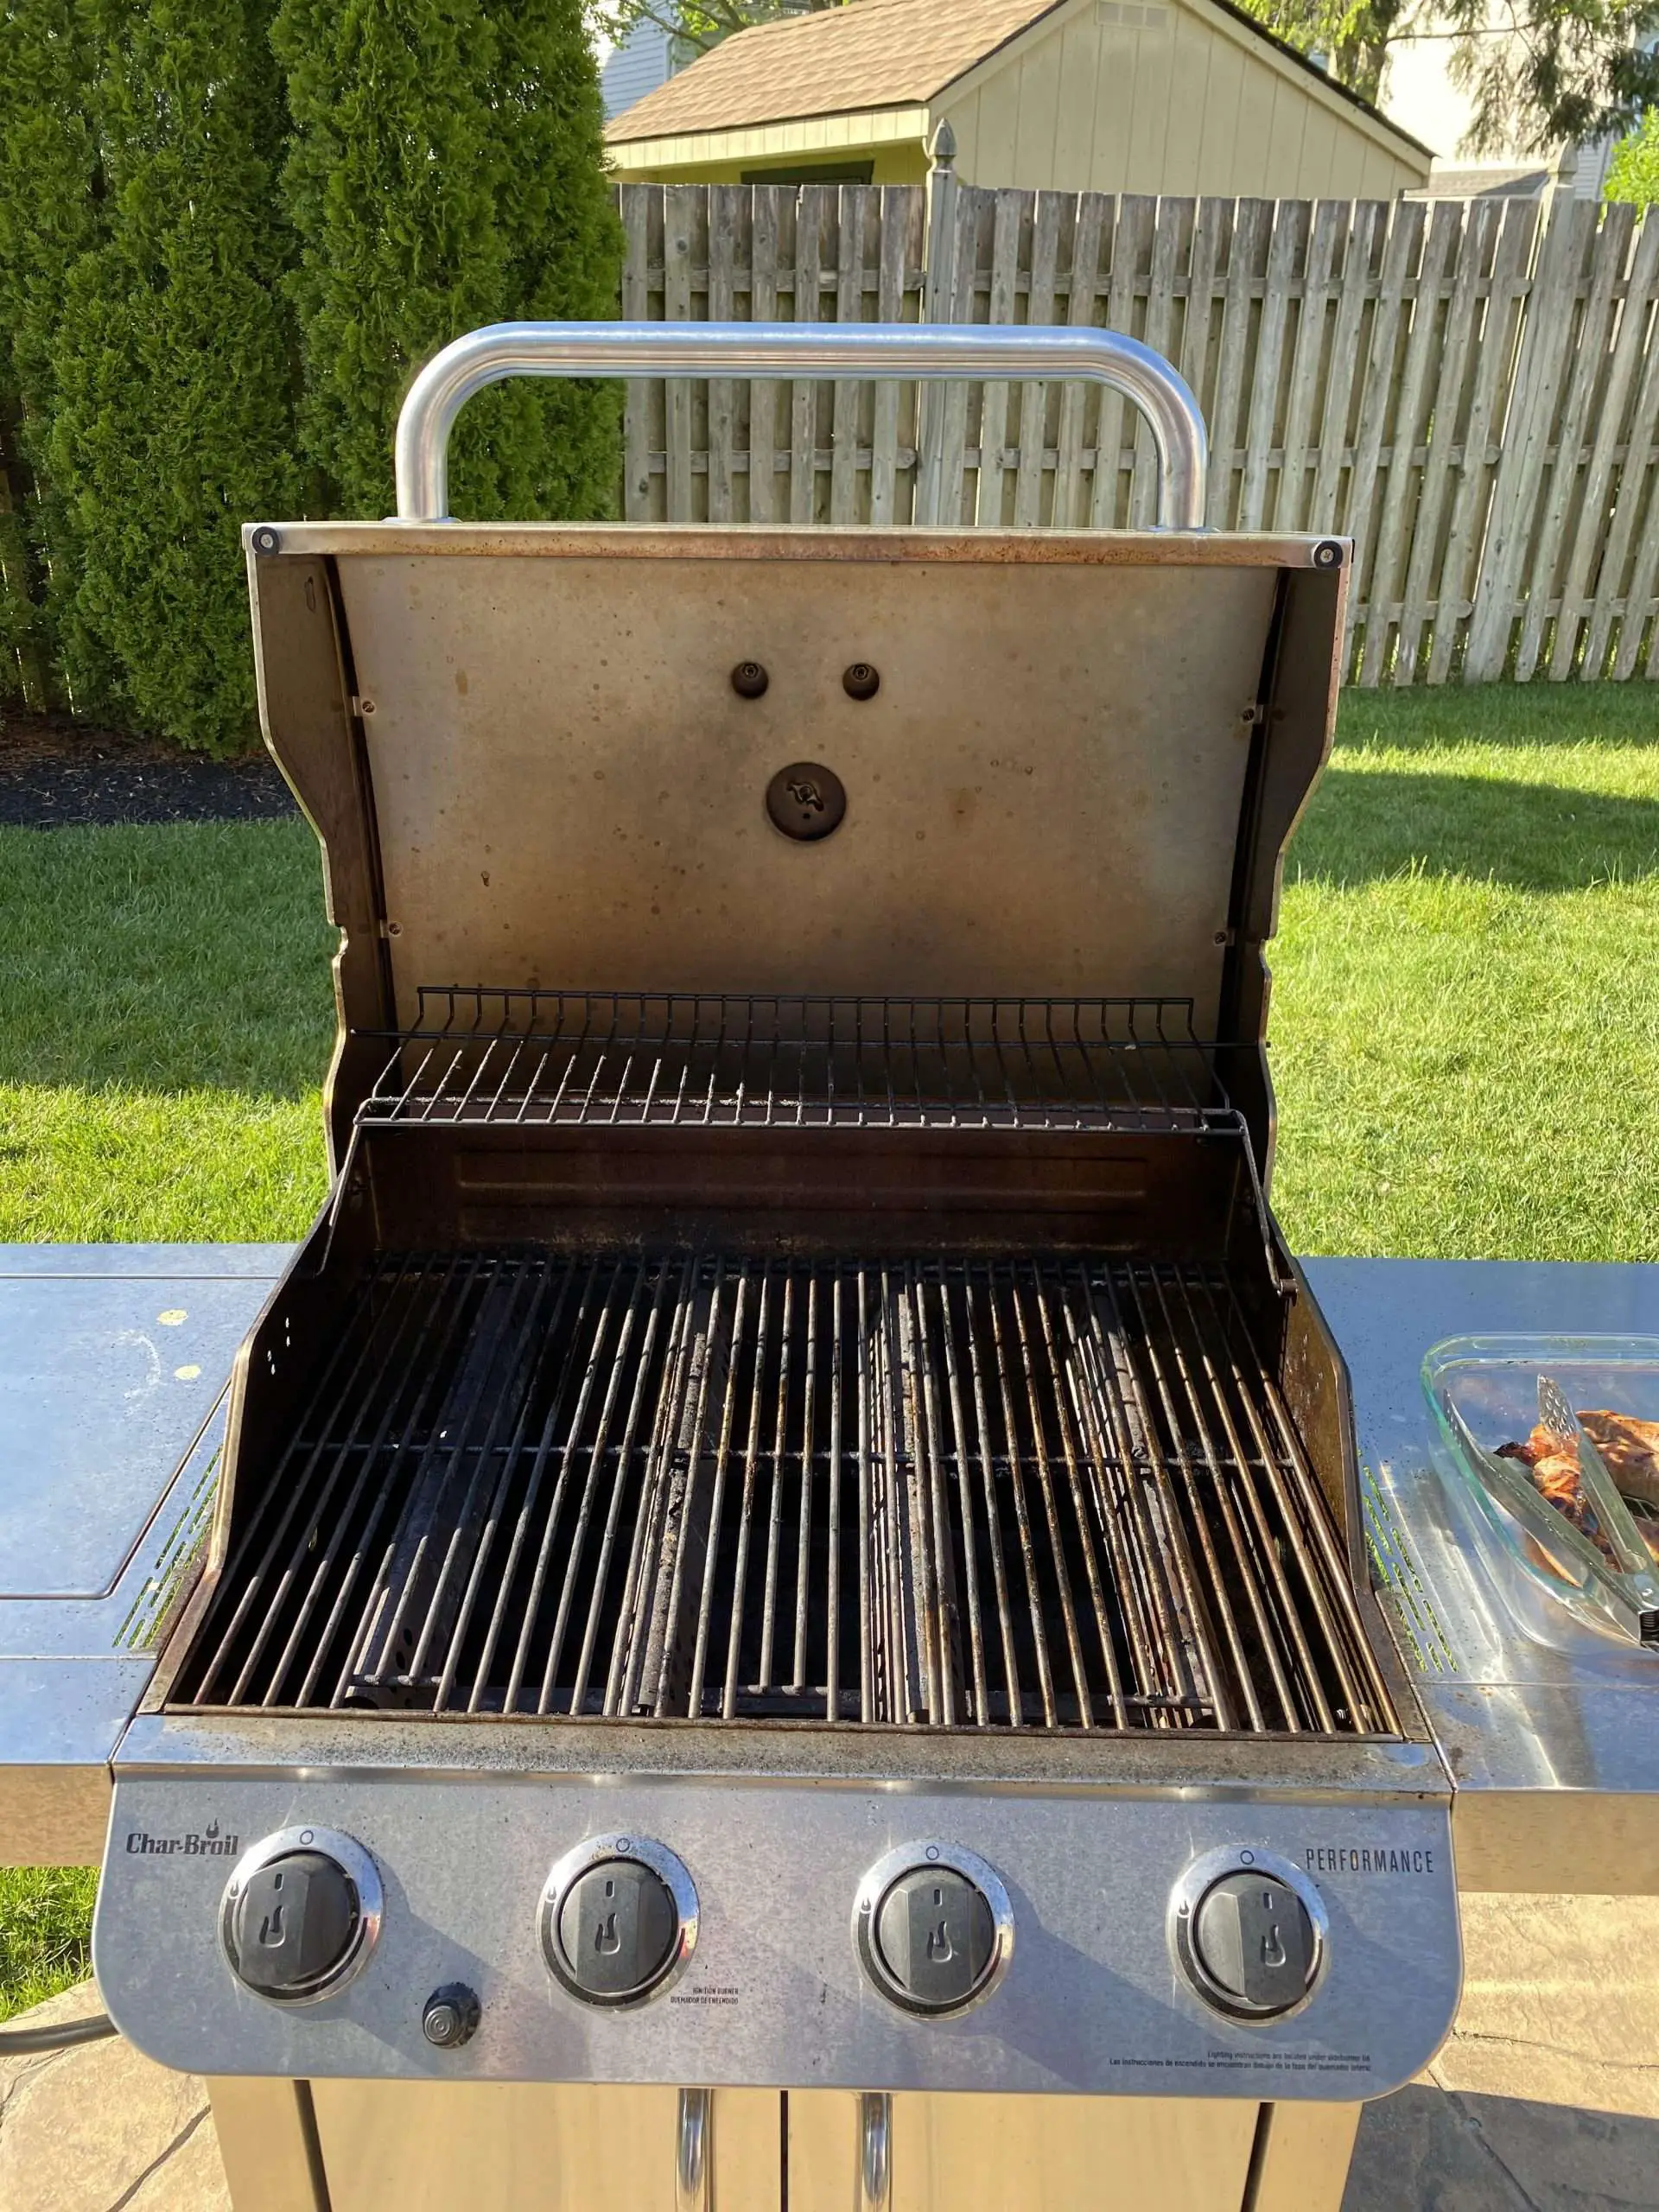 How to clean my grill? Best methods? : howto